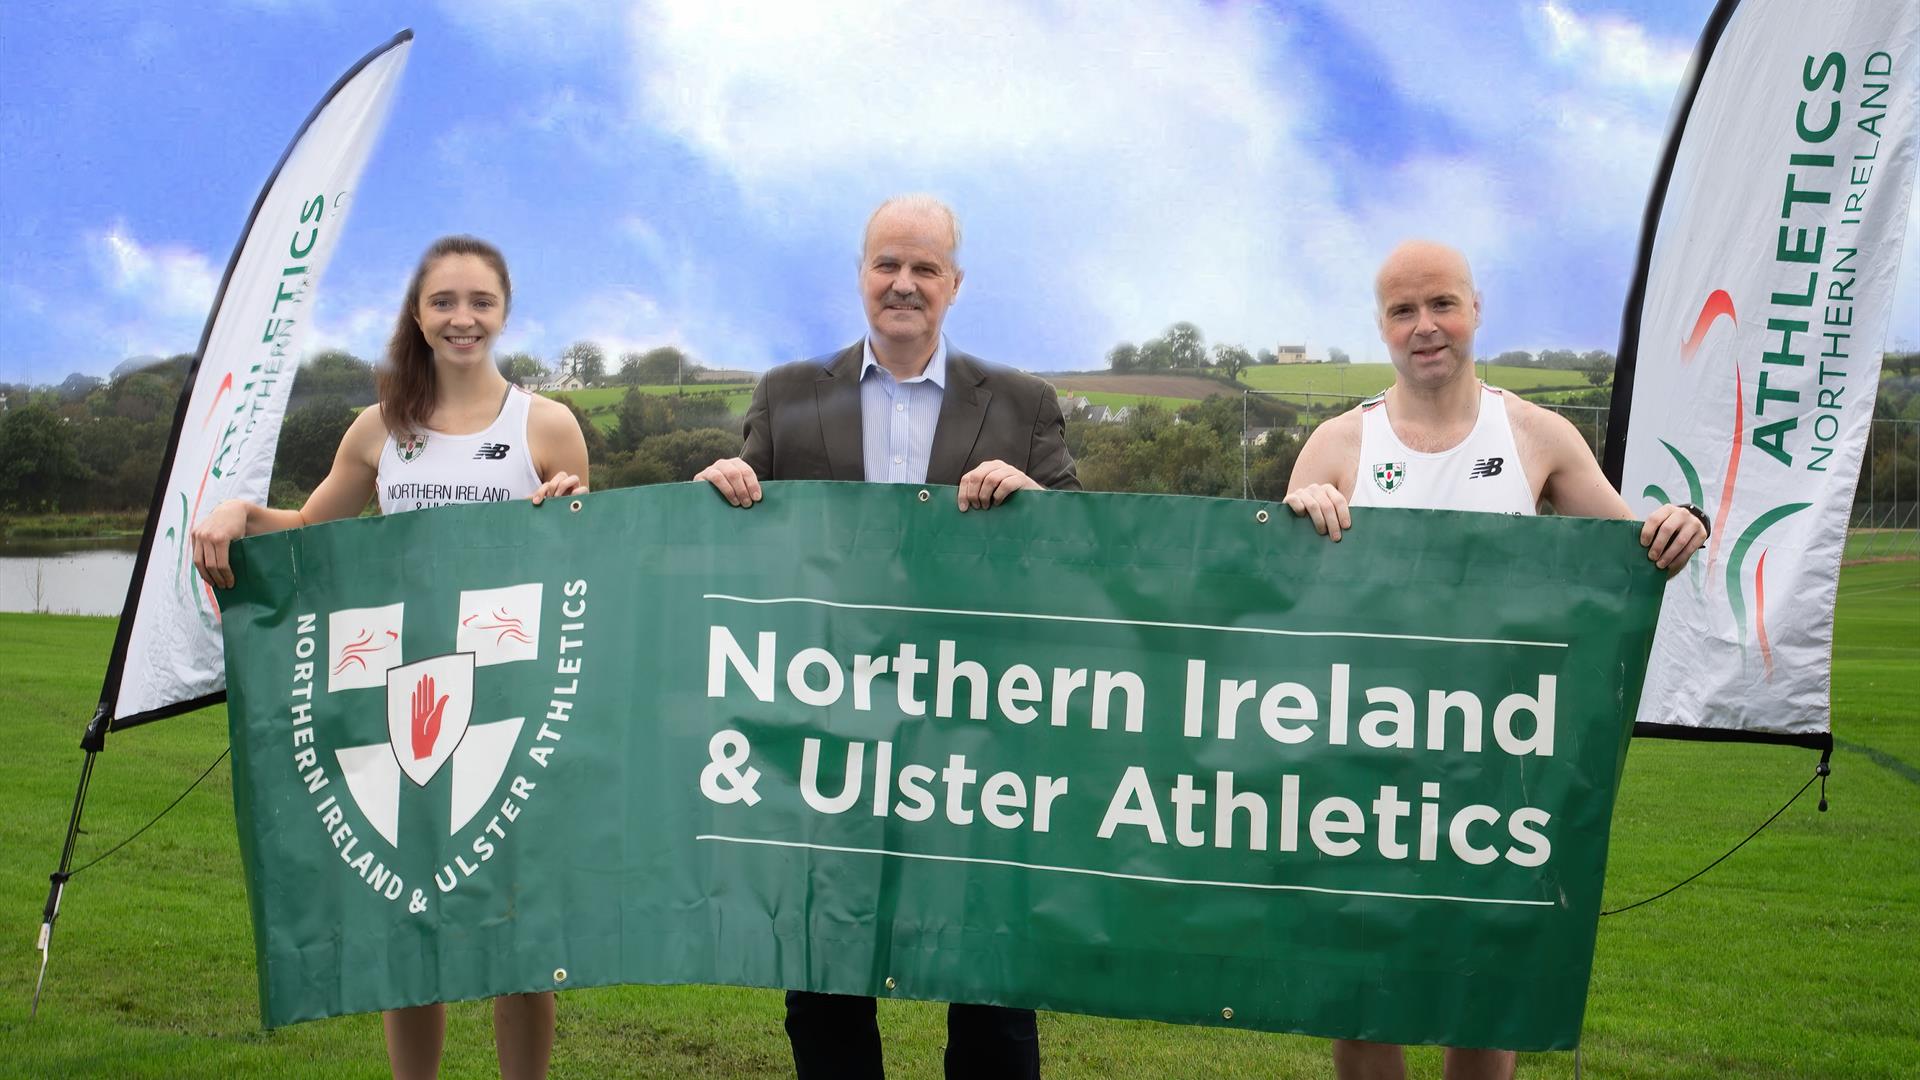 Image is of two runners holding a banner advertising Northern Ireland & Ulster Athletics